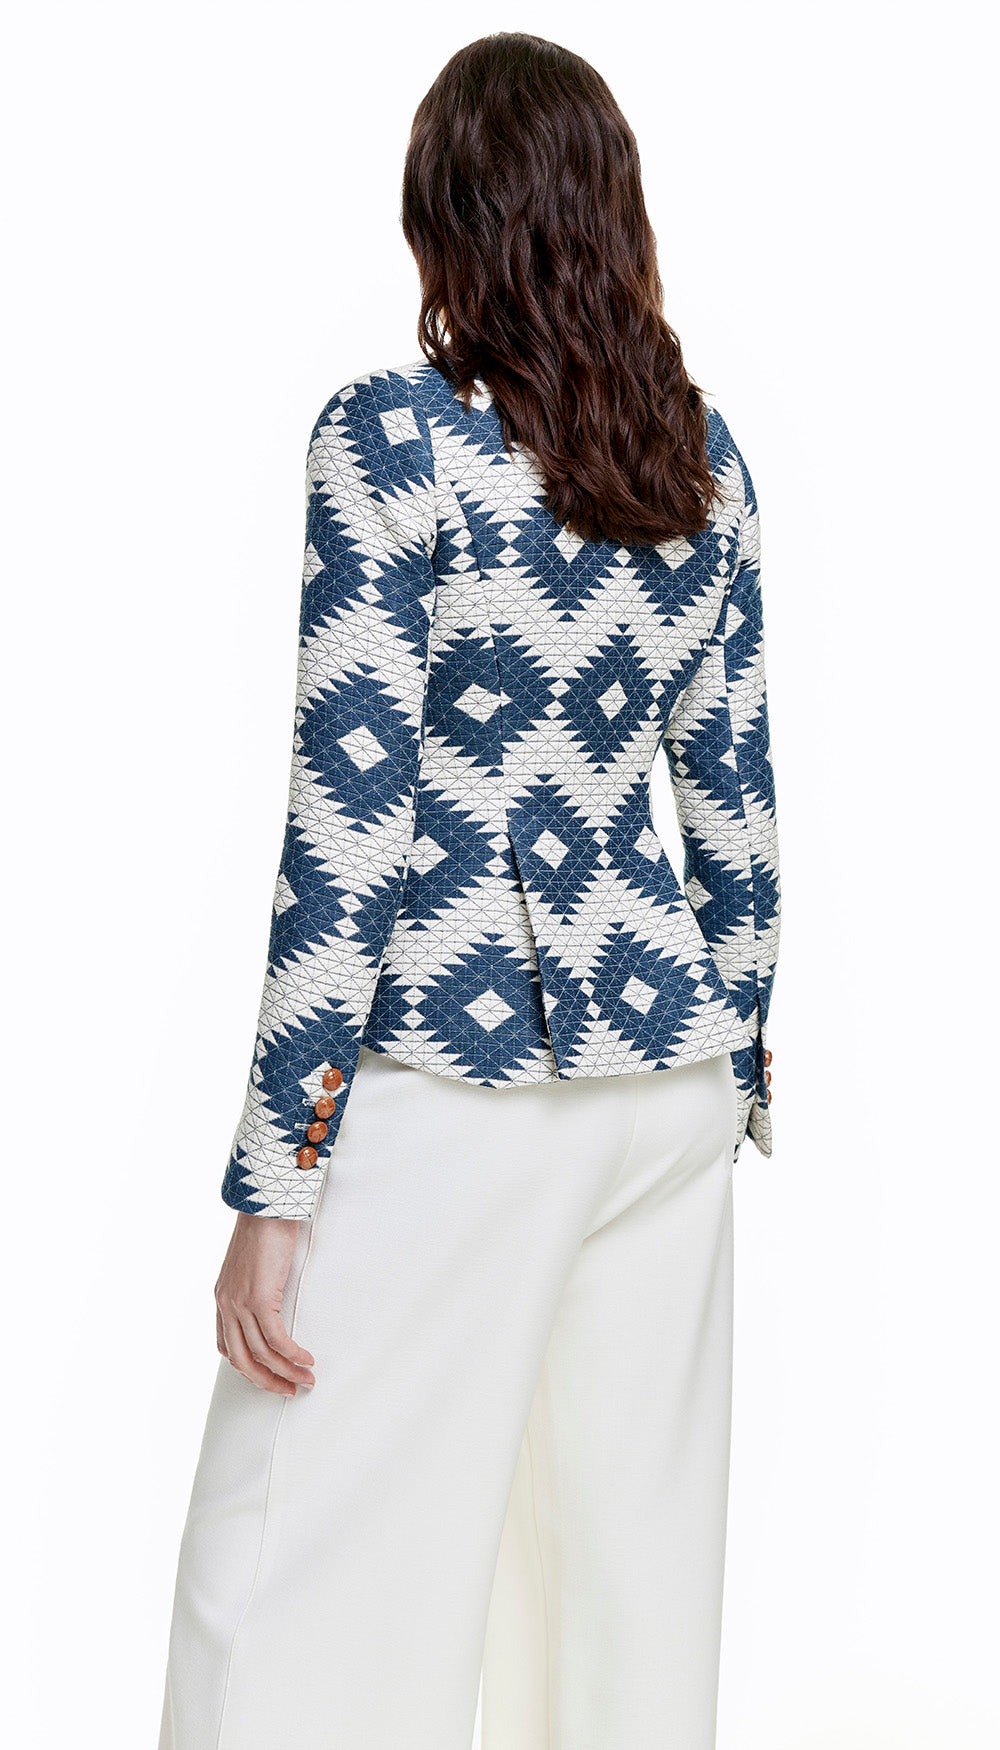 The back of a woman in a blue and white quilted blazer.